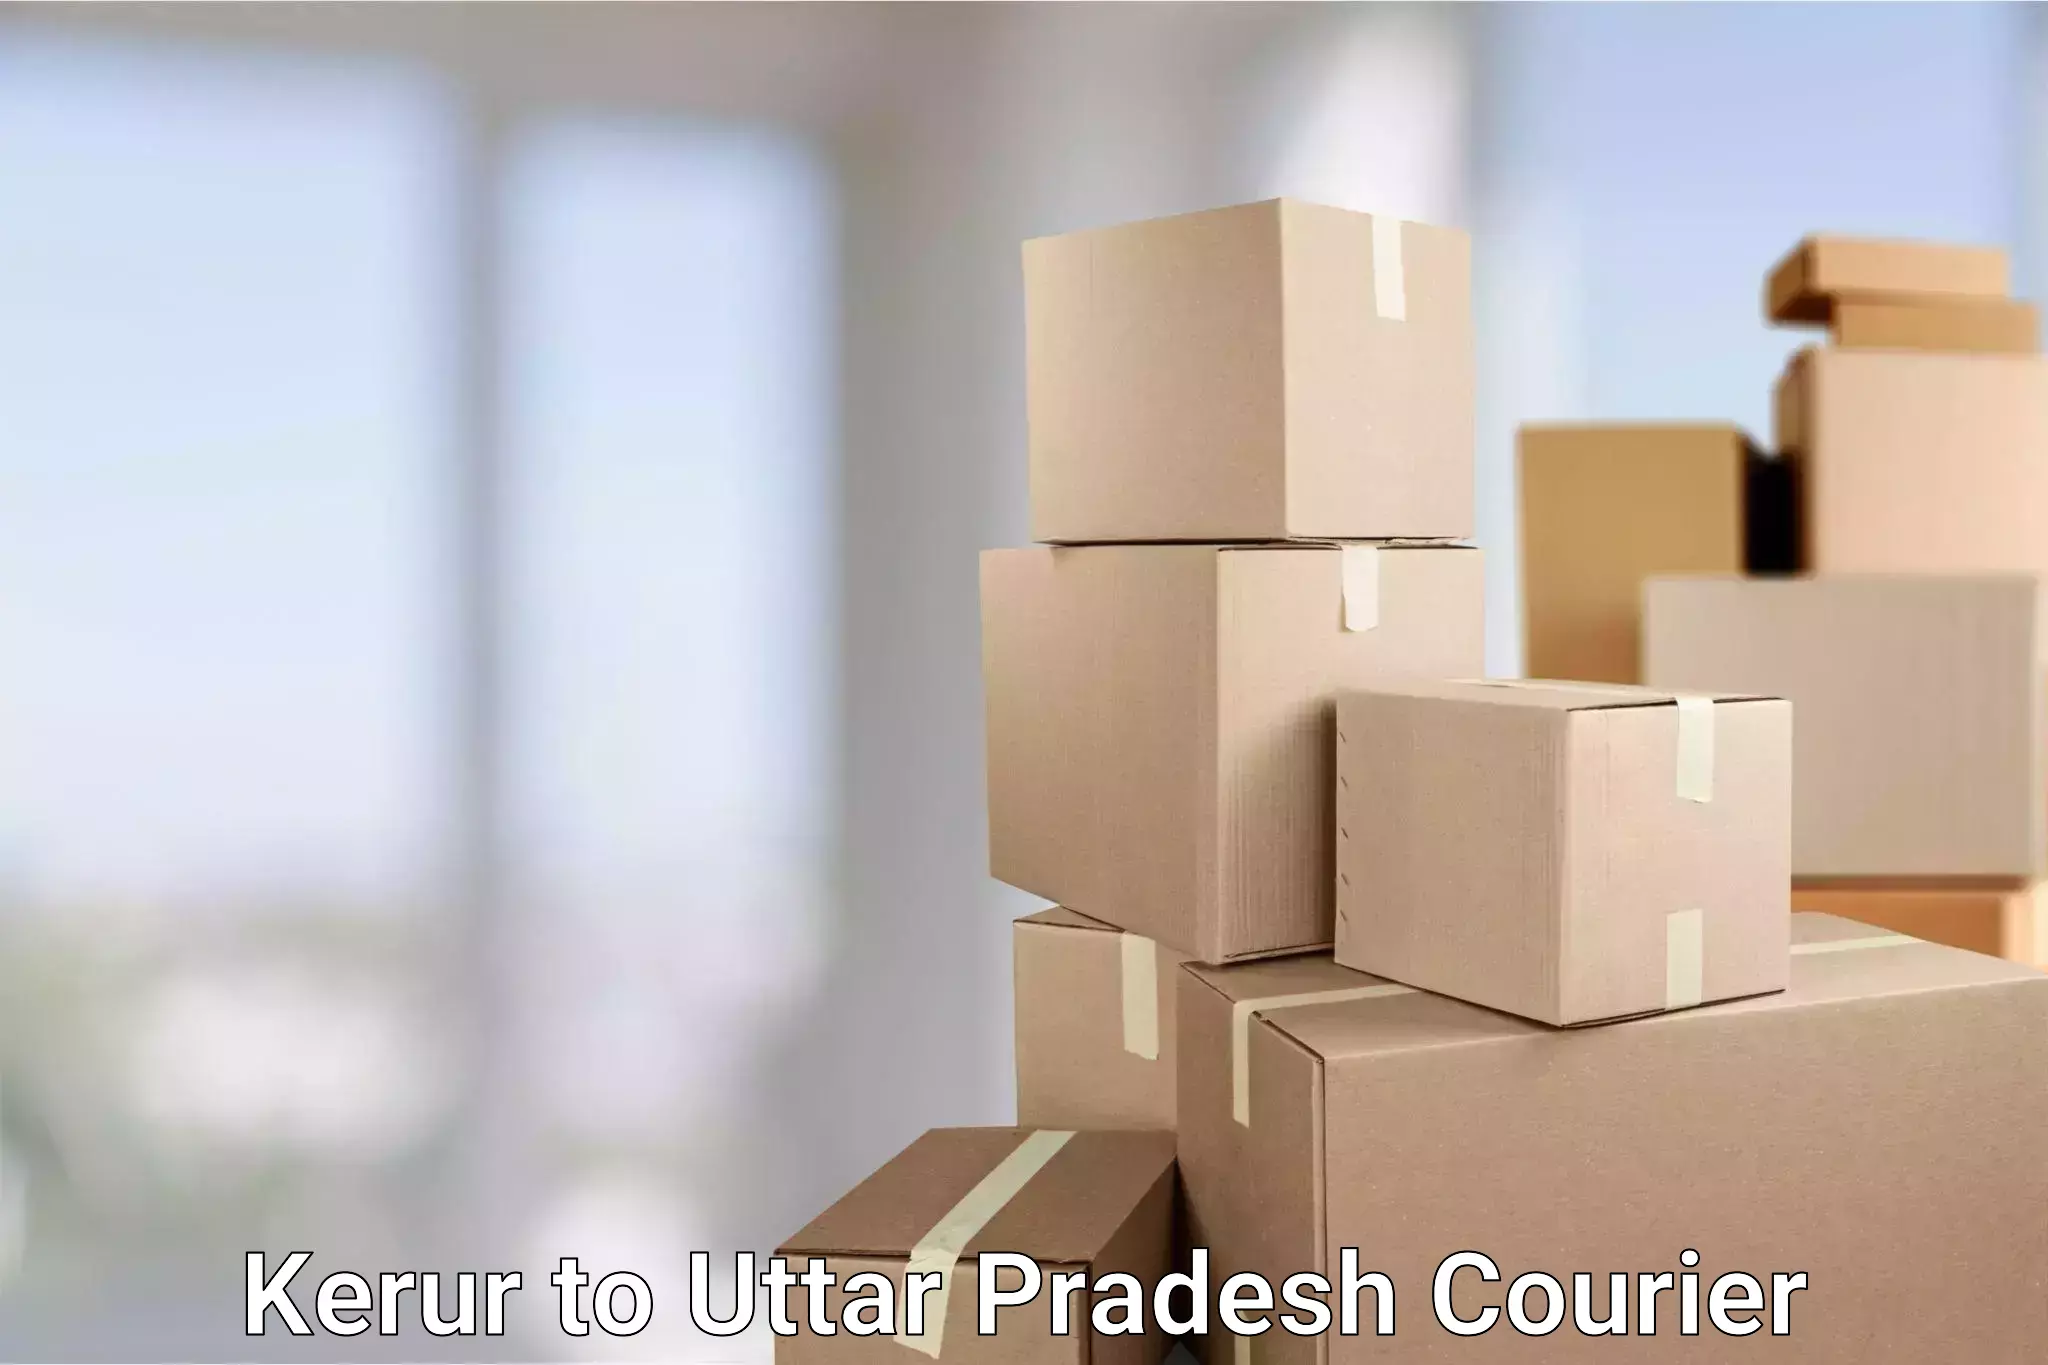 Multi-national courier services Kerur to Firozabad